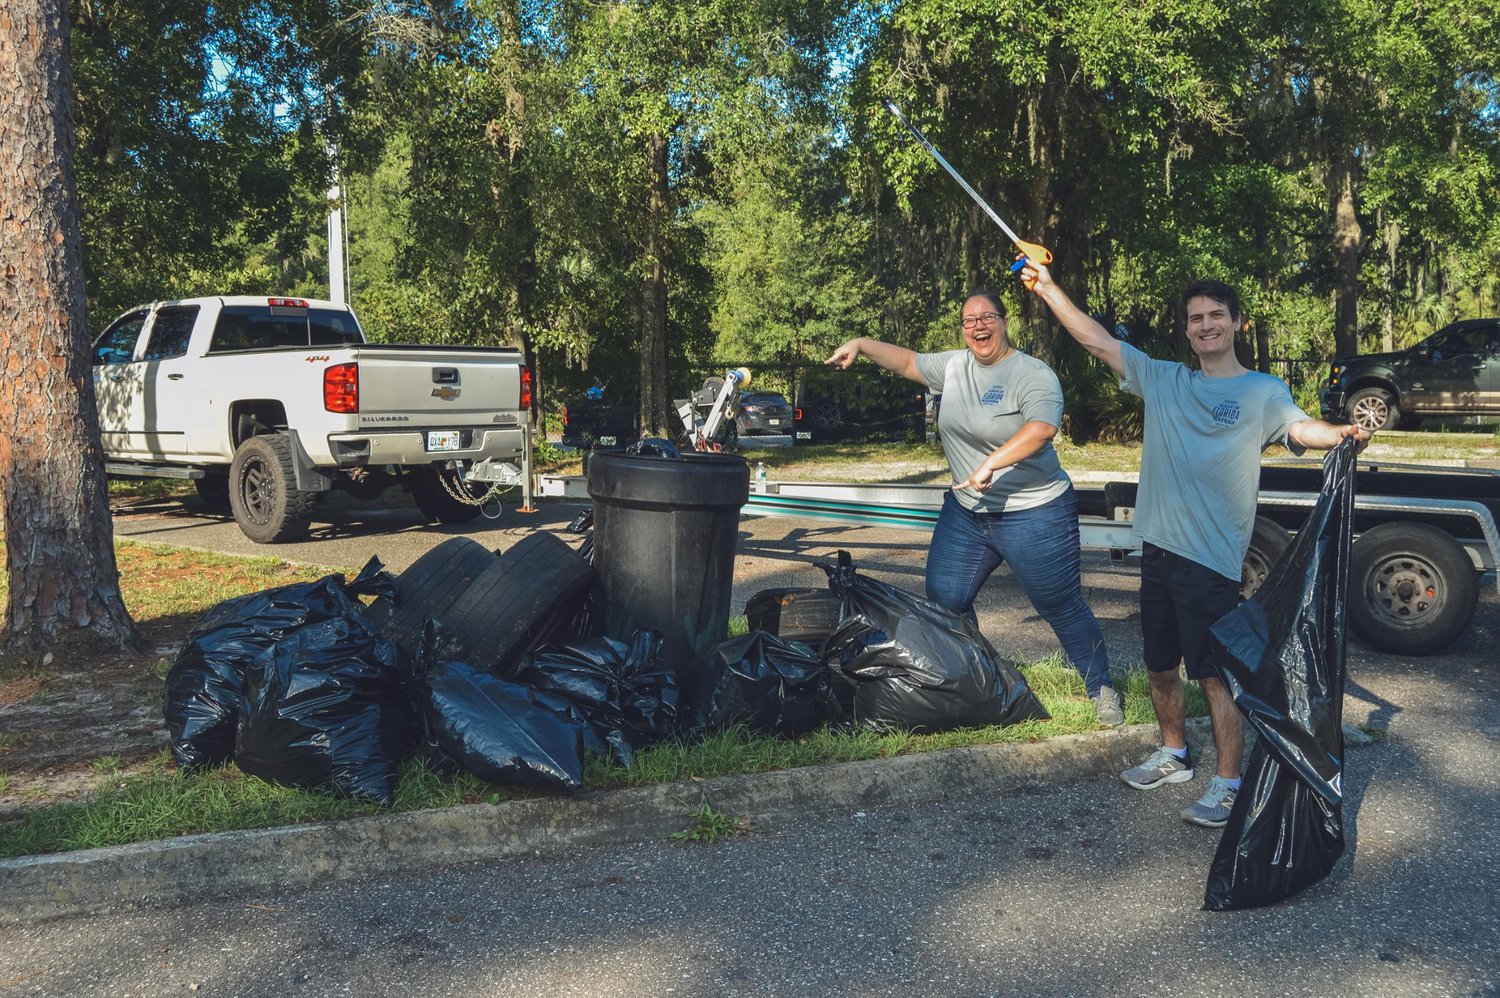 Volunteers at the Wayne Stevens Boat Ramp were happy to show off their successful efforts.